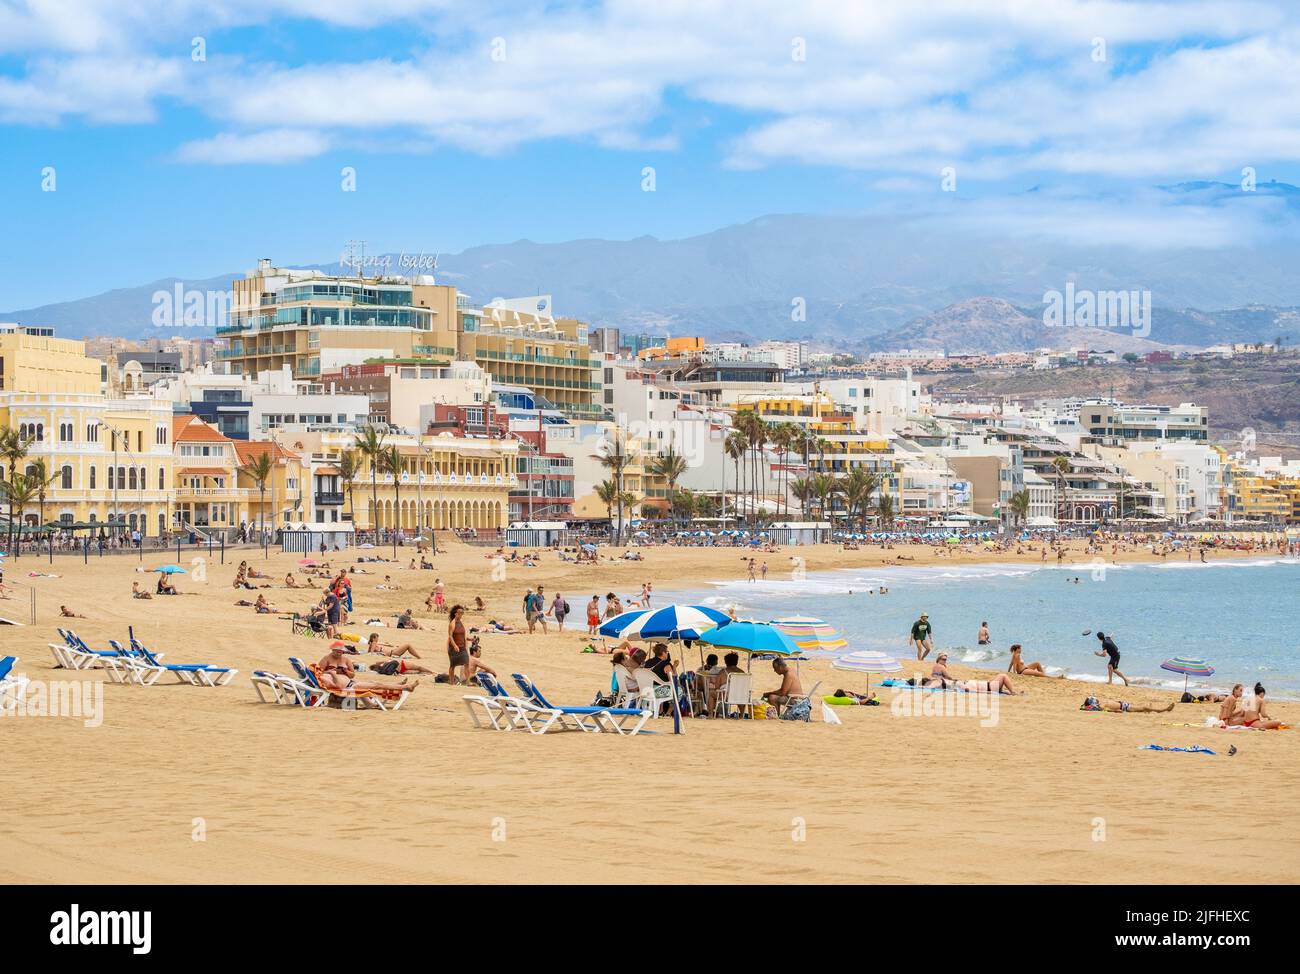 Las Palmas, Gran Canaria, Canary Islands, Spain. 3rd July, 2022. Tourists, many from the UK, on the city beach in Las Palmas on Gran Canaria; a popular holiday destination for many UK holidaymakers. Flight cancellations and staff shortages at some UK airports are expected to cause disruption throughout the summer. Credit: Alan Dawson/ Alamy Live News. Stock Photo